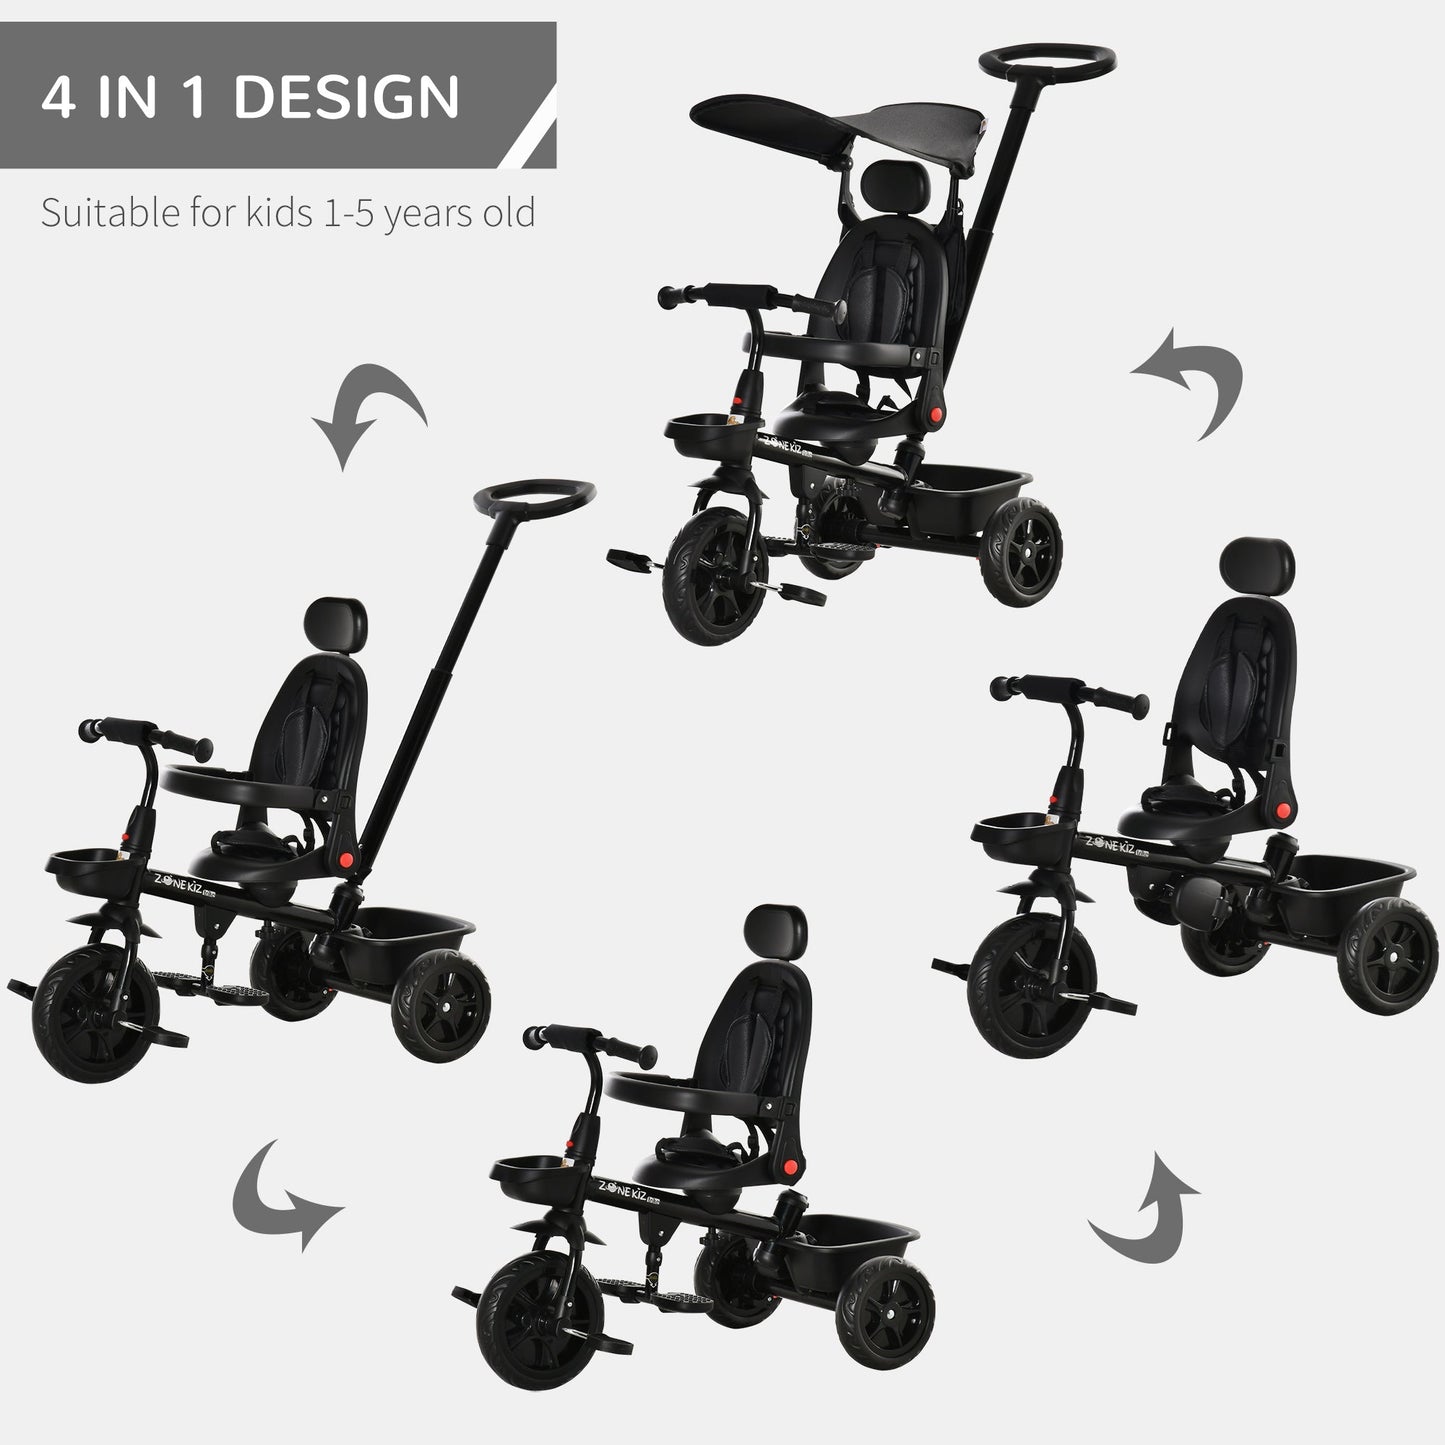 Kids Tricycle 4 In 1 Trike with Reversible Angle Adjustable Seat Removable Handle Canopy Handrail Belt Storage Footrest Brake Clutch for 1-5 Years Old Black at Gallery Canada